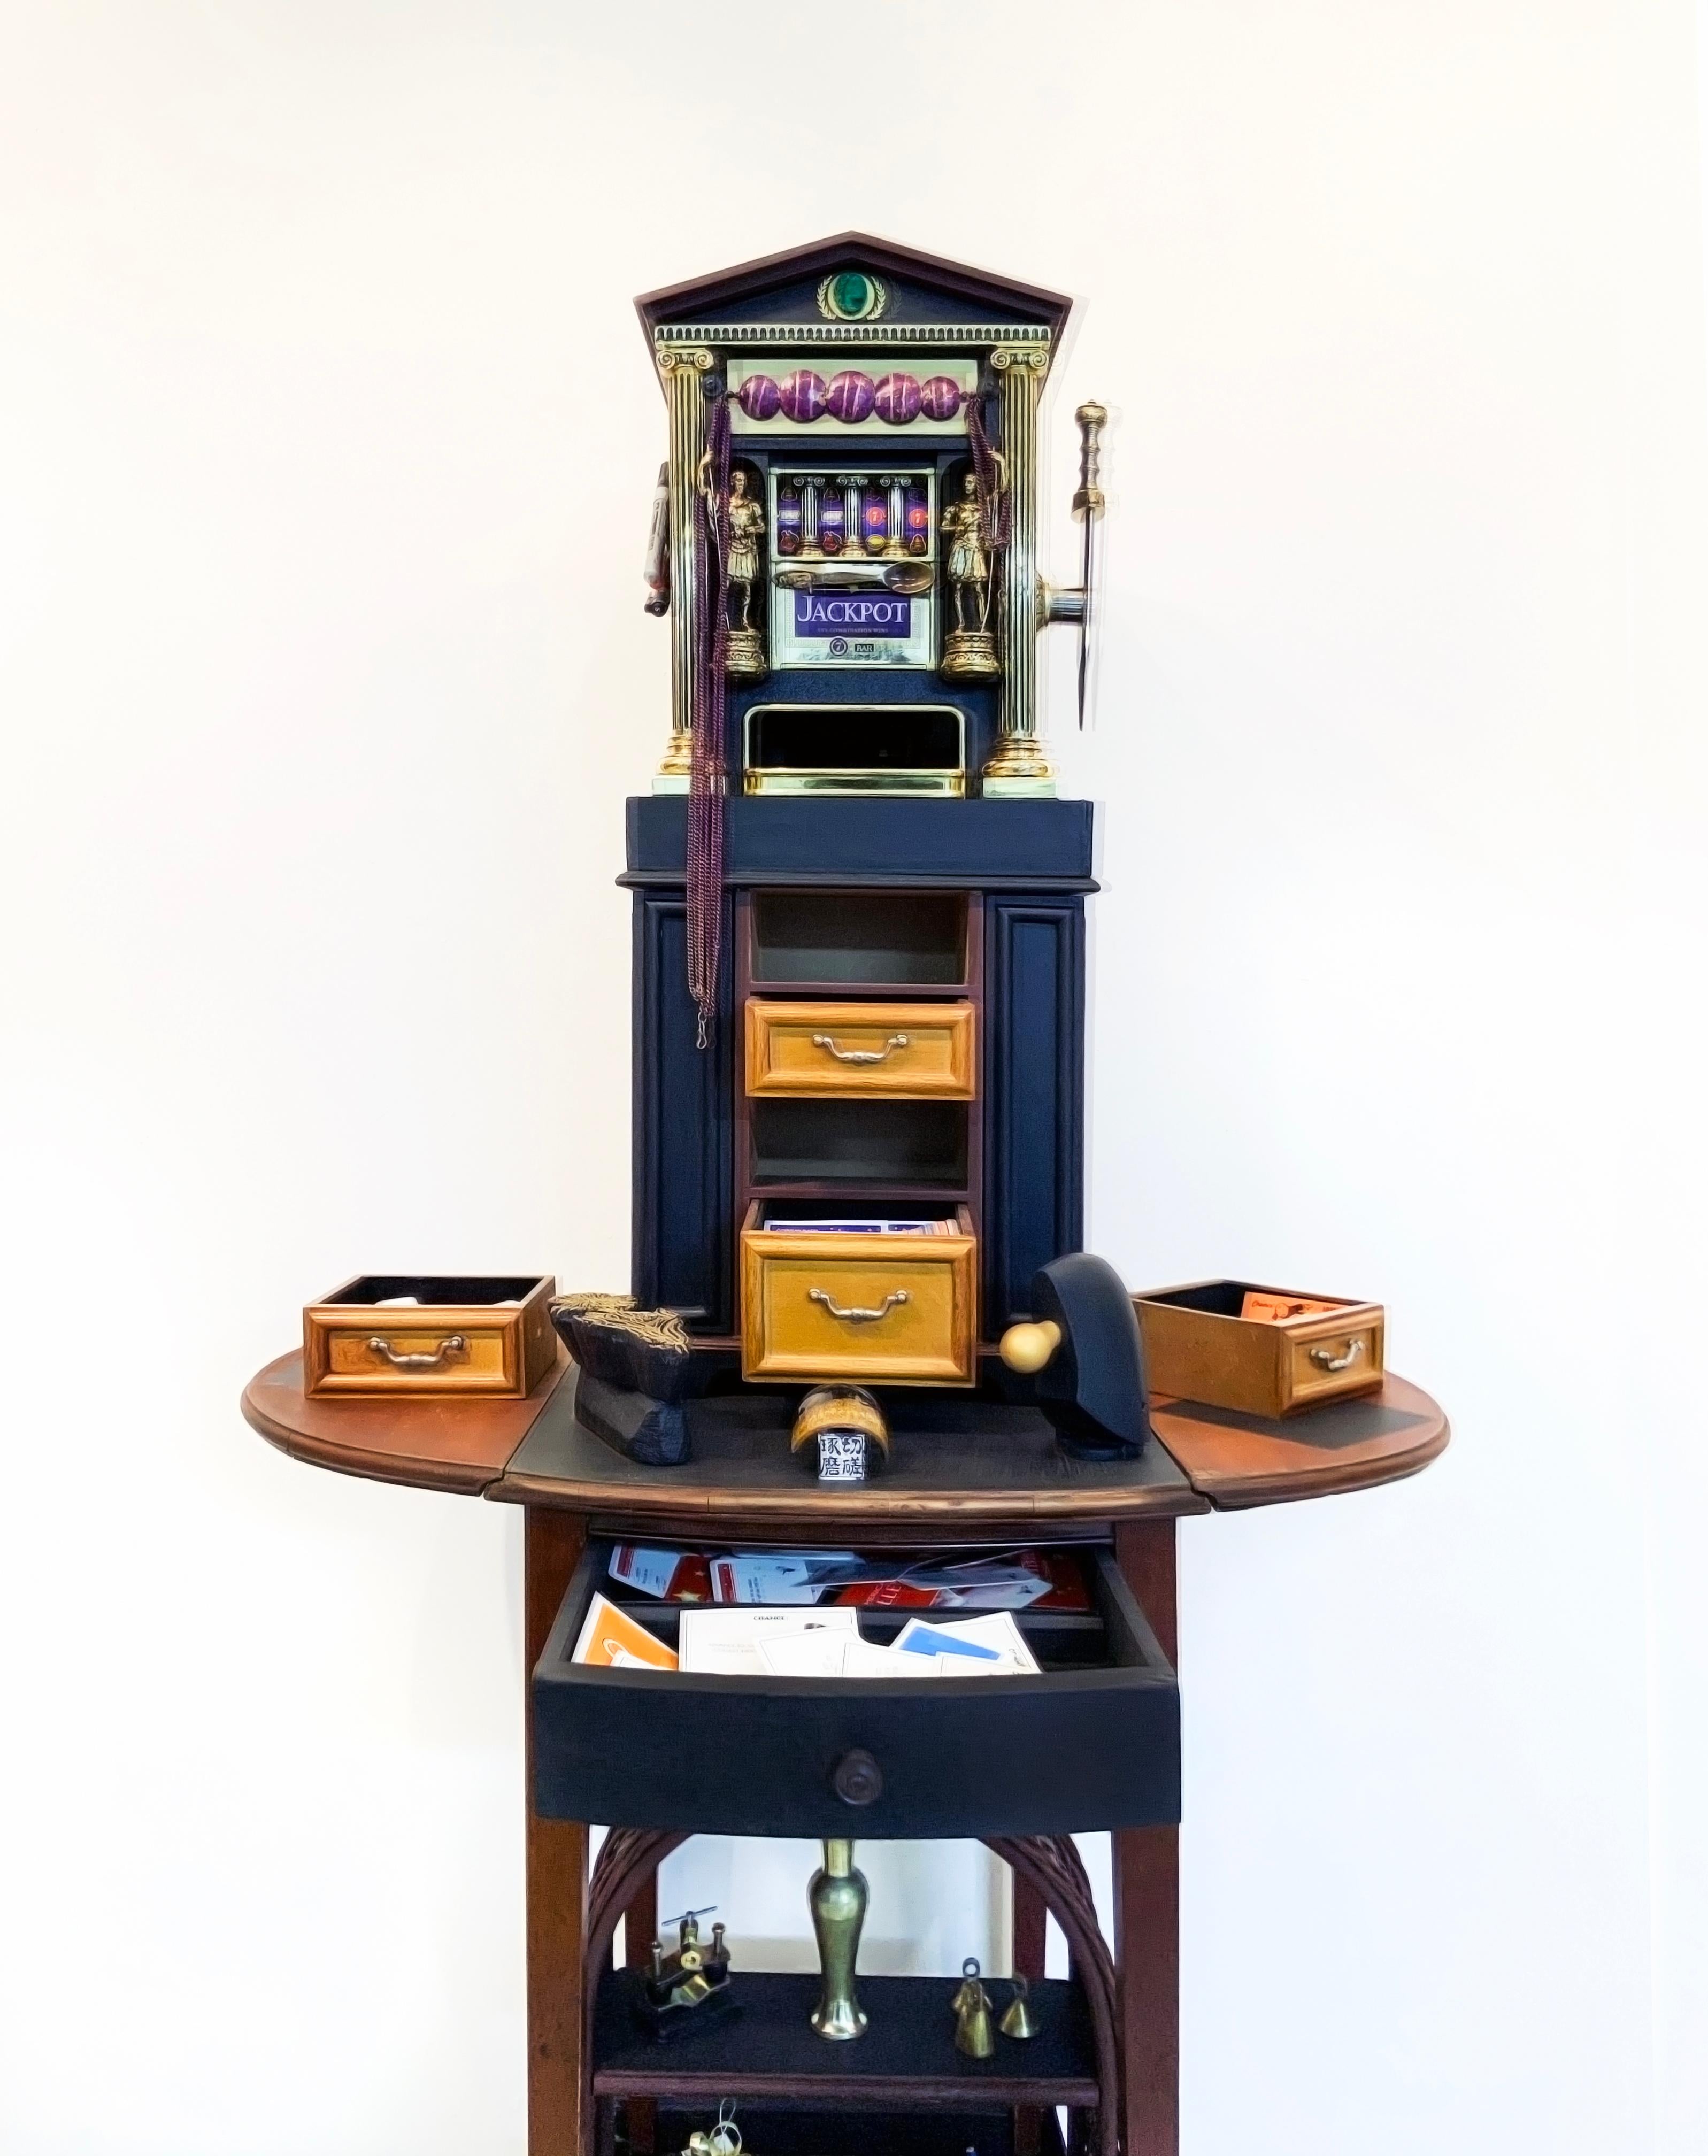 This work from Linda Stein's Displacement From Home series draws from the tradition of wunderkammer/cabinets of curiosities to highlight the global displacement and traumatic memory of migrants and refugees around the world. 

Works from this series